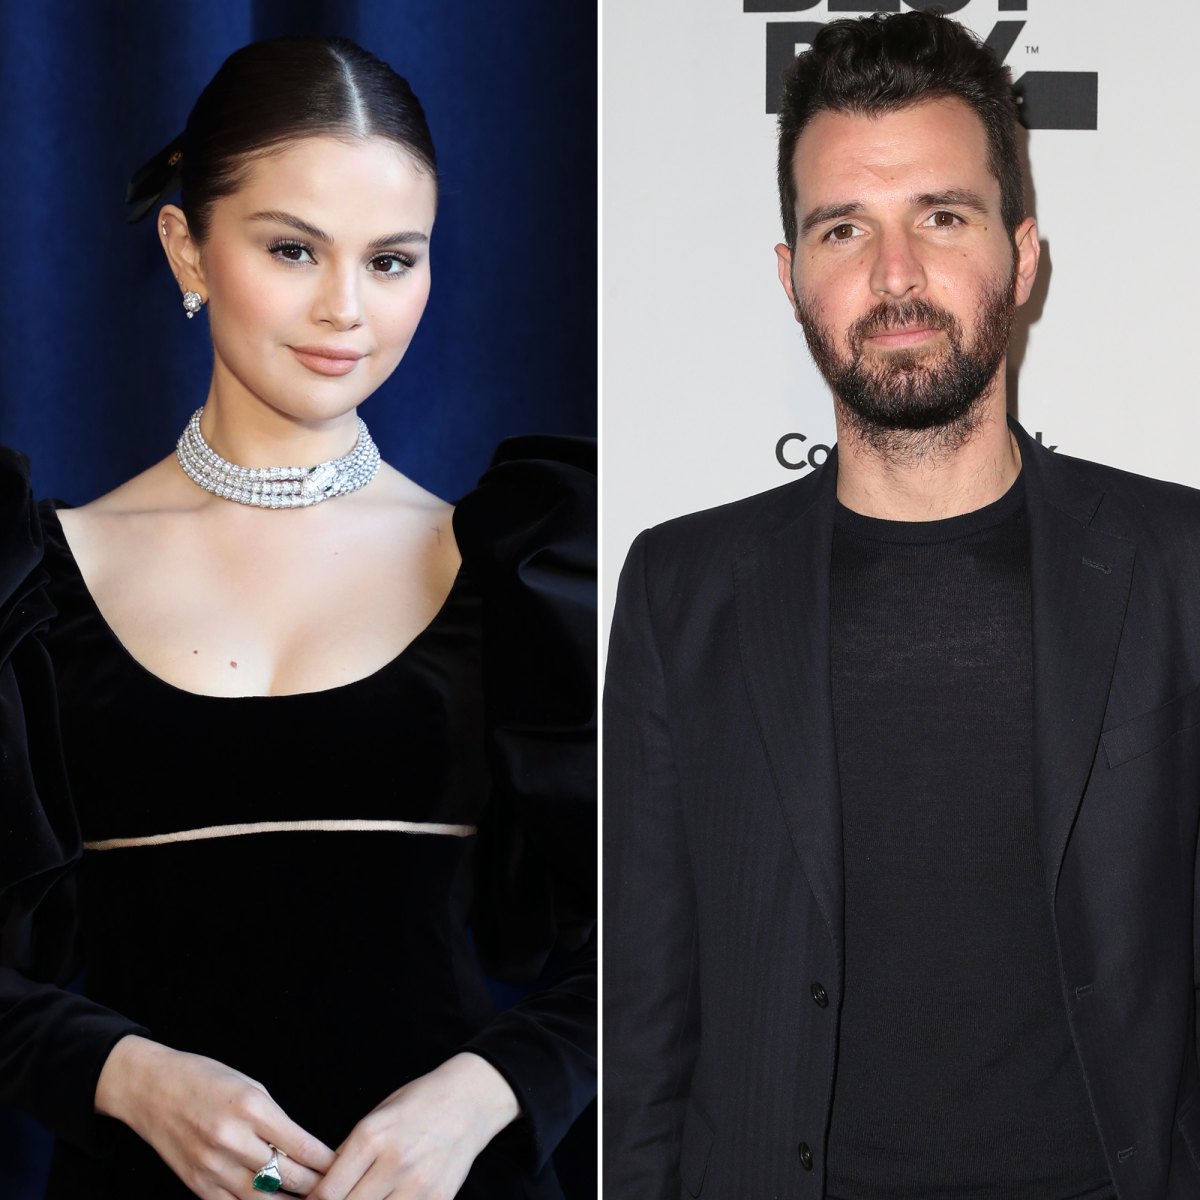 Selena Gomez Is 'Dating' and 'Keeping Her Options Open' Amid Andrea Iervolino Romance Rumors